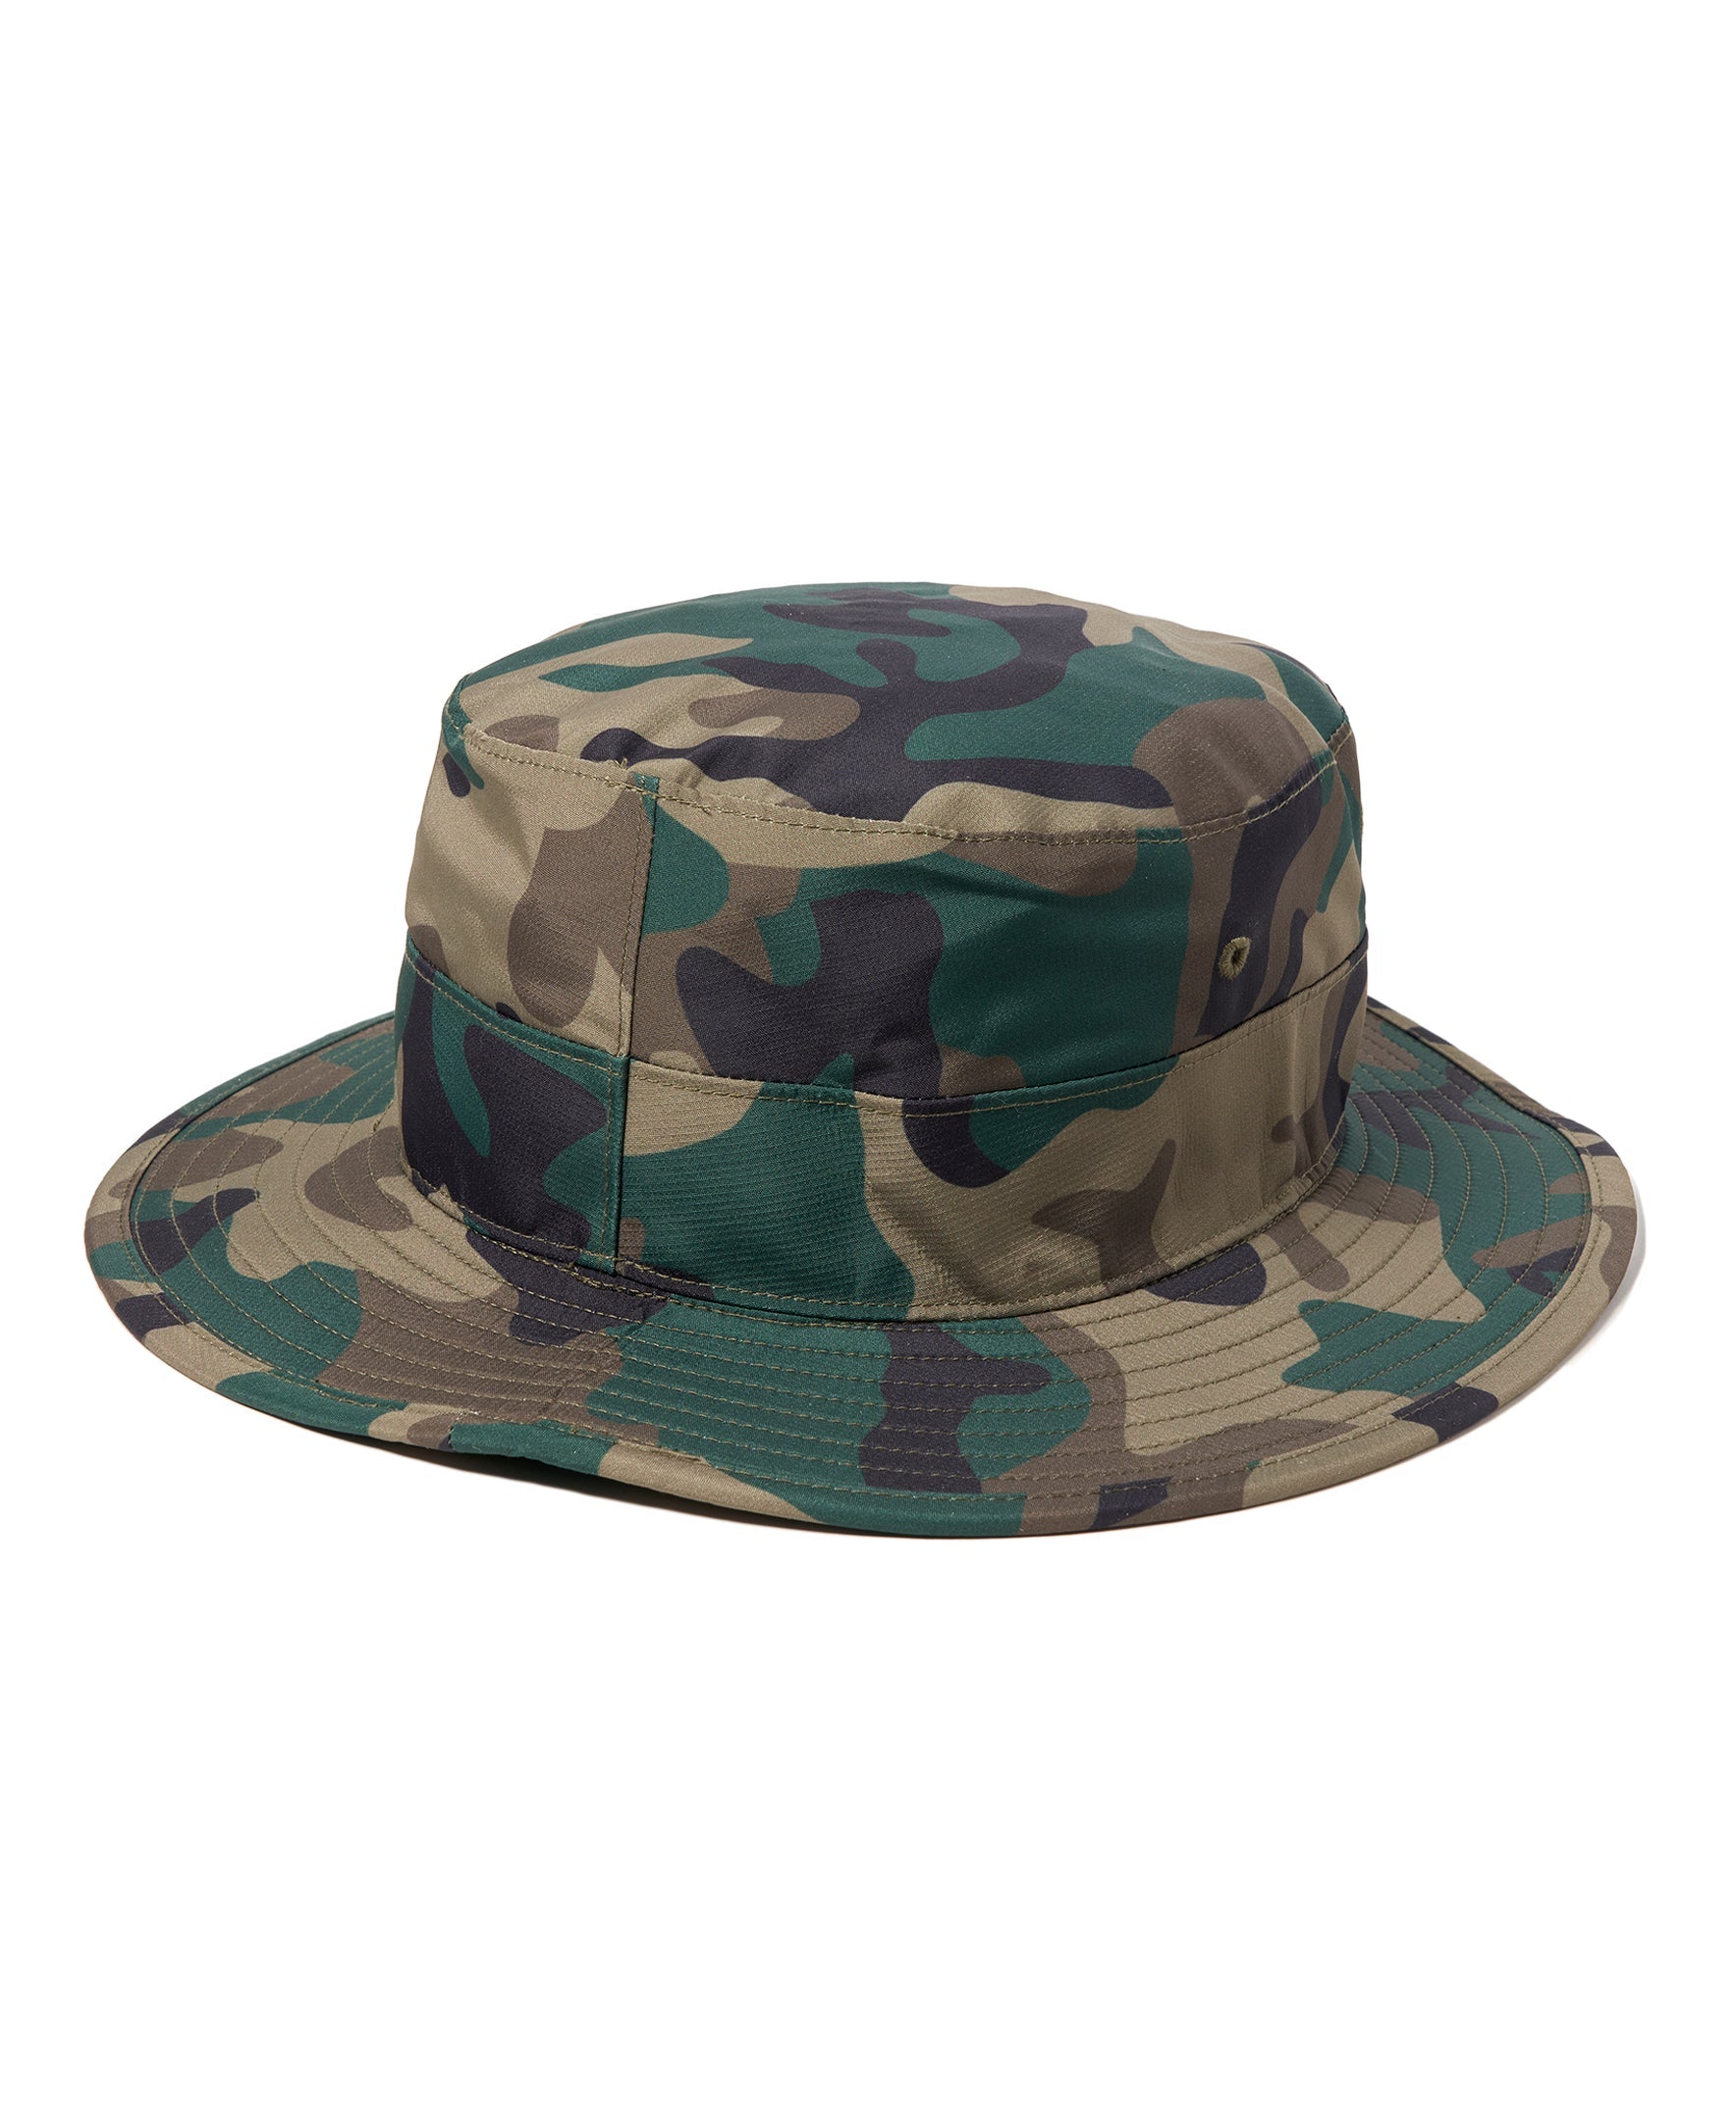 Hurley Back Country Boonie Mens Hat - Camo